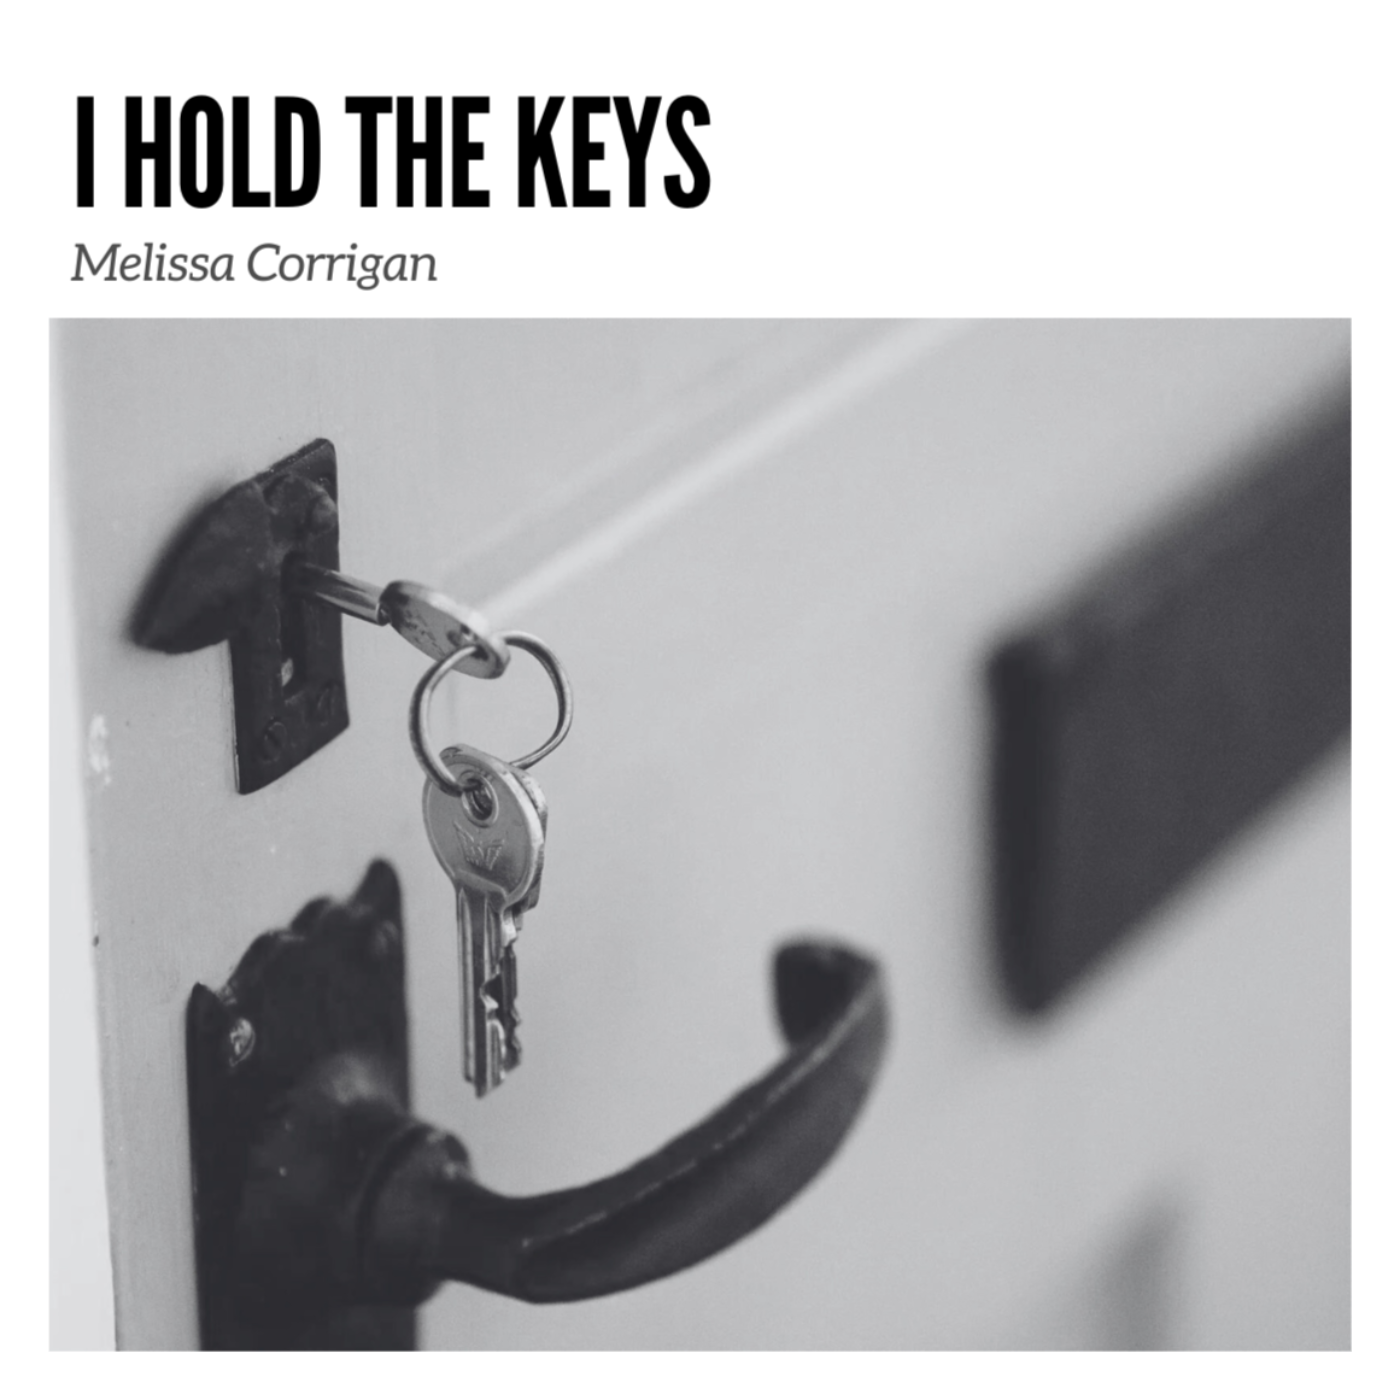 I Hold the Keys: Writing, Creating, and Sharing for Healing and Shared Growth